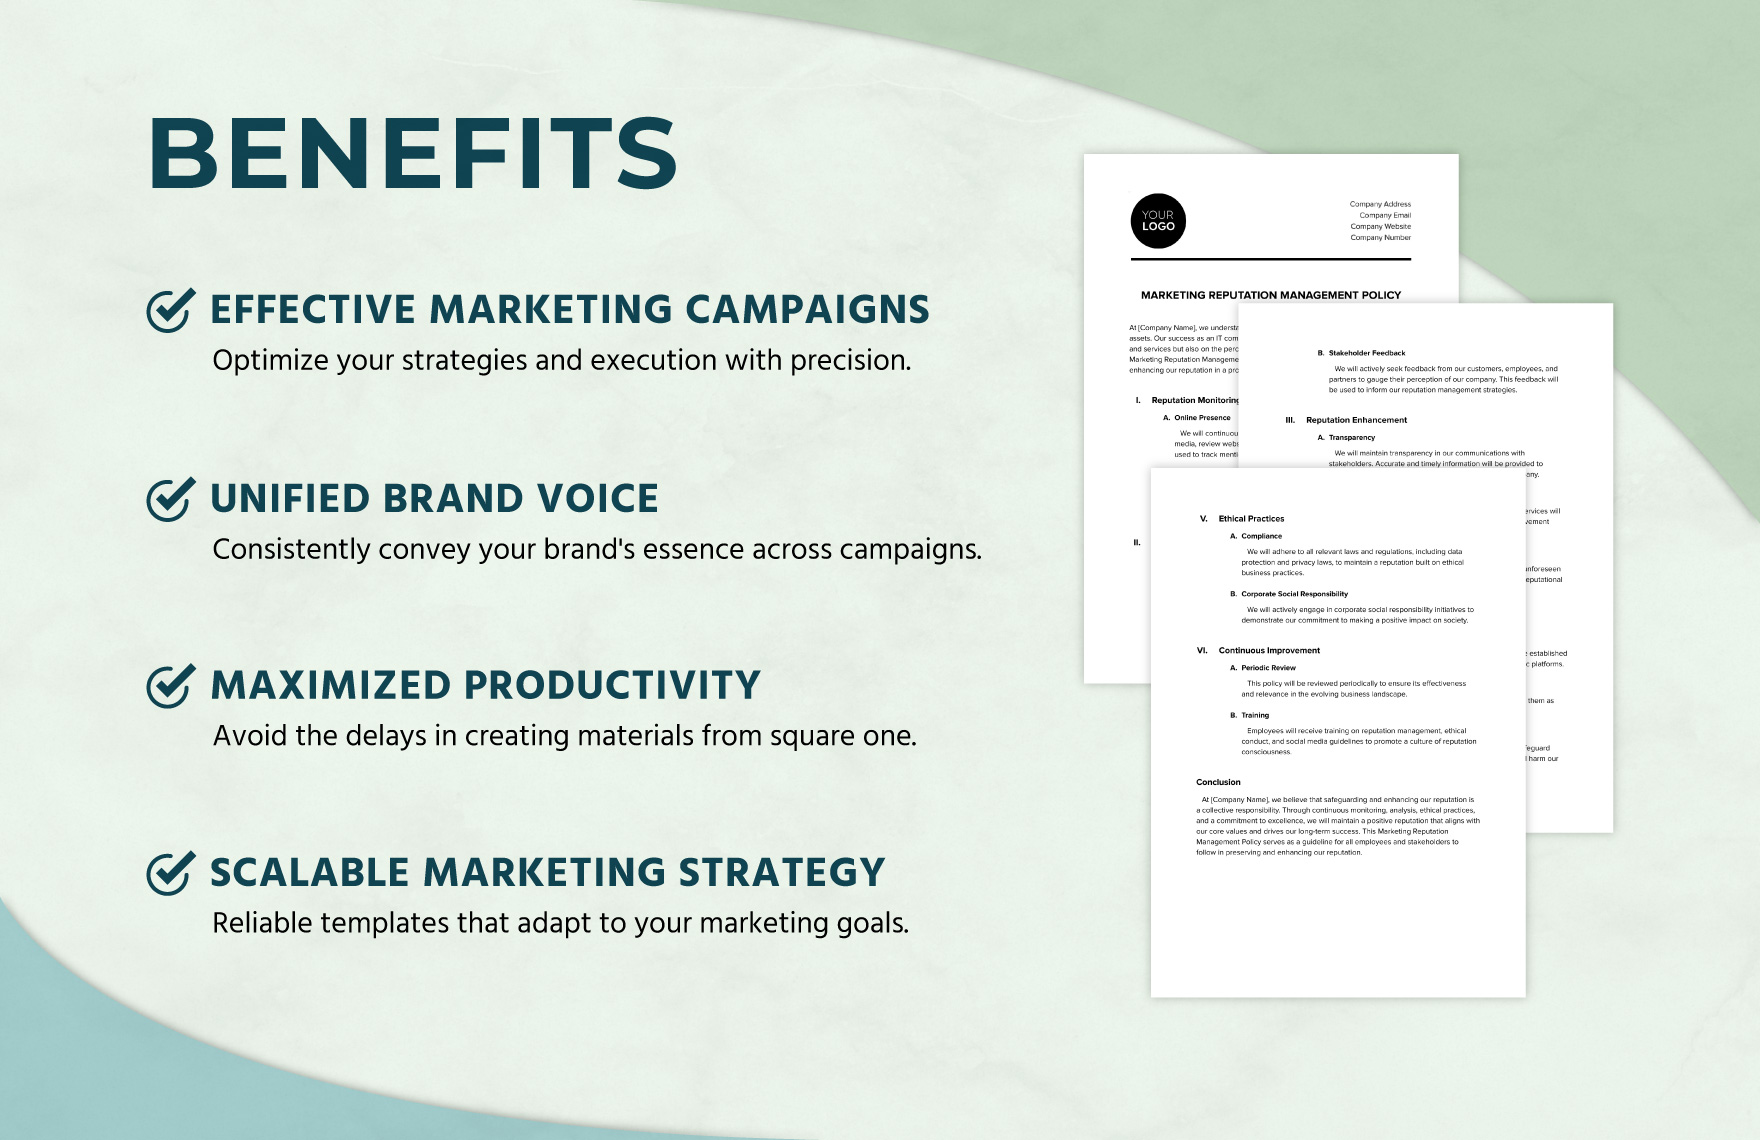 Marketing Reputation Management Policy Template